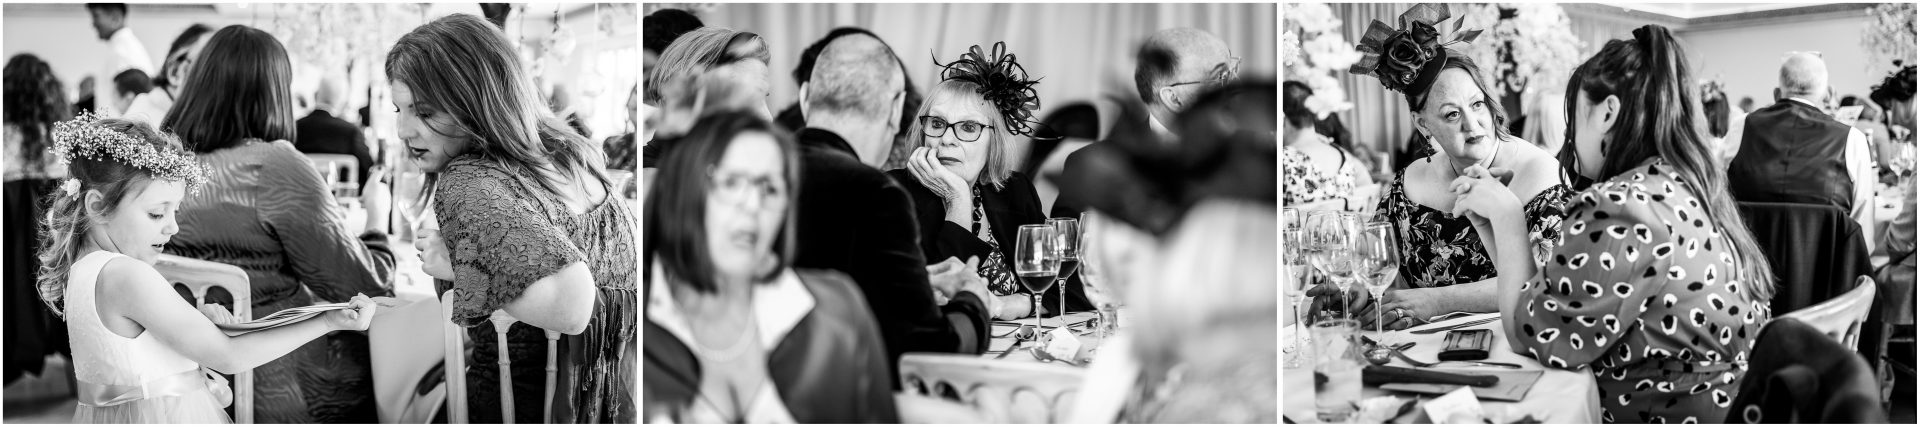 Black and white documentary photos of wedding guests during the meal